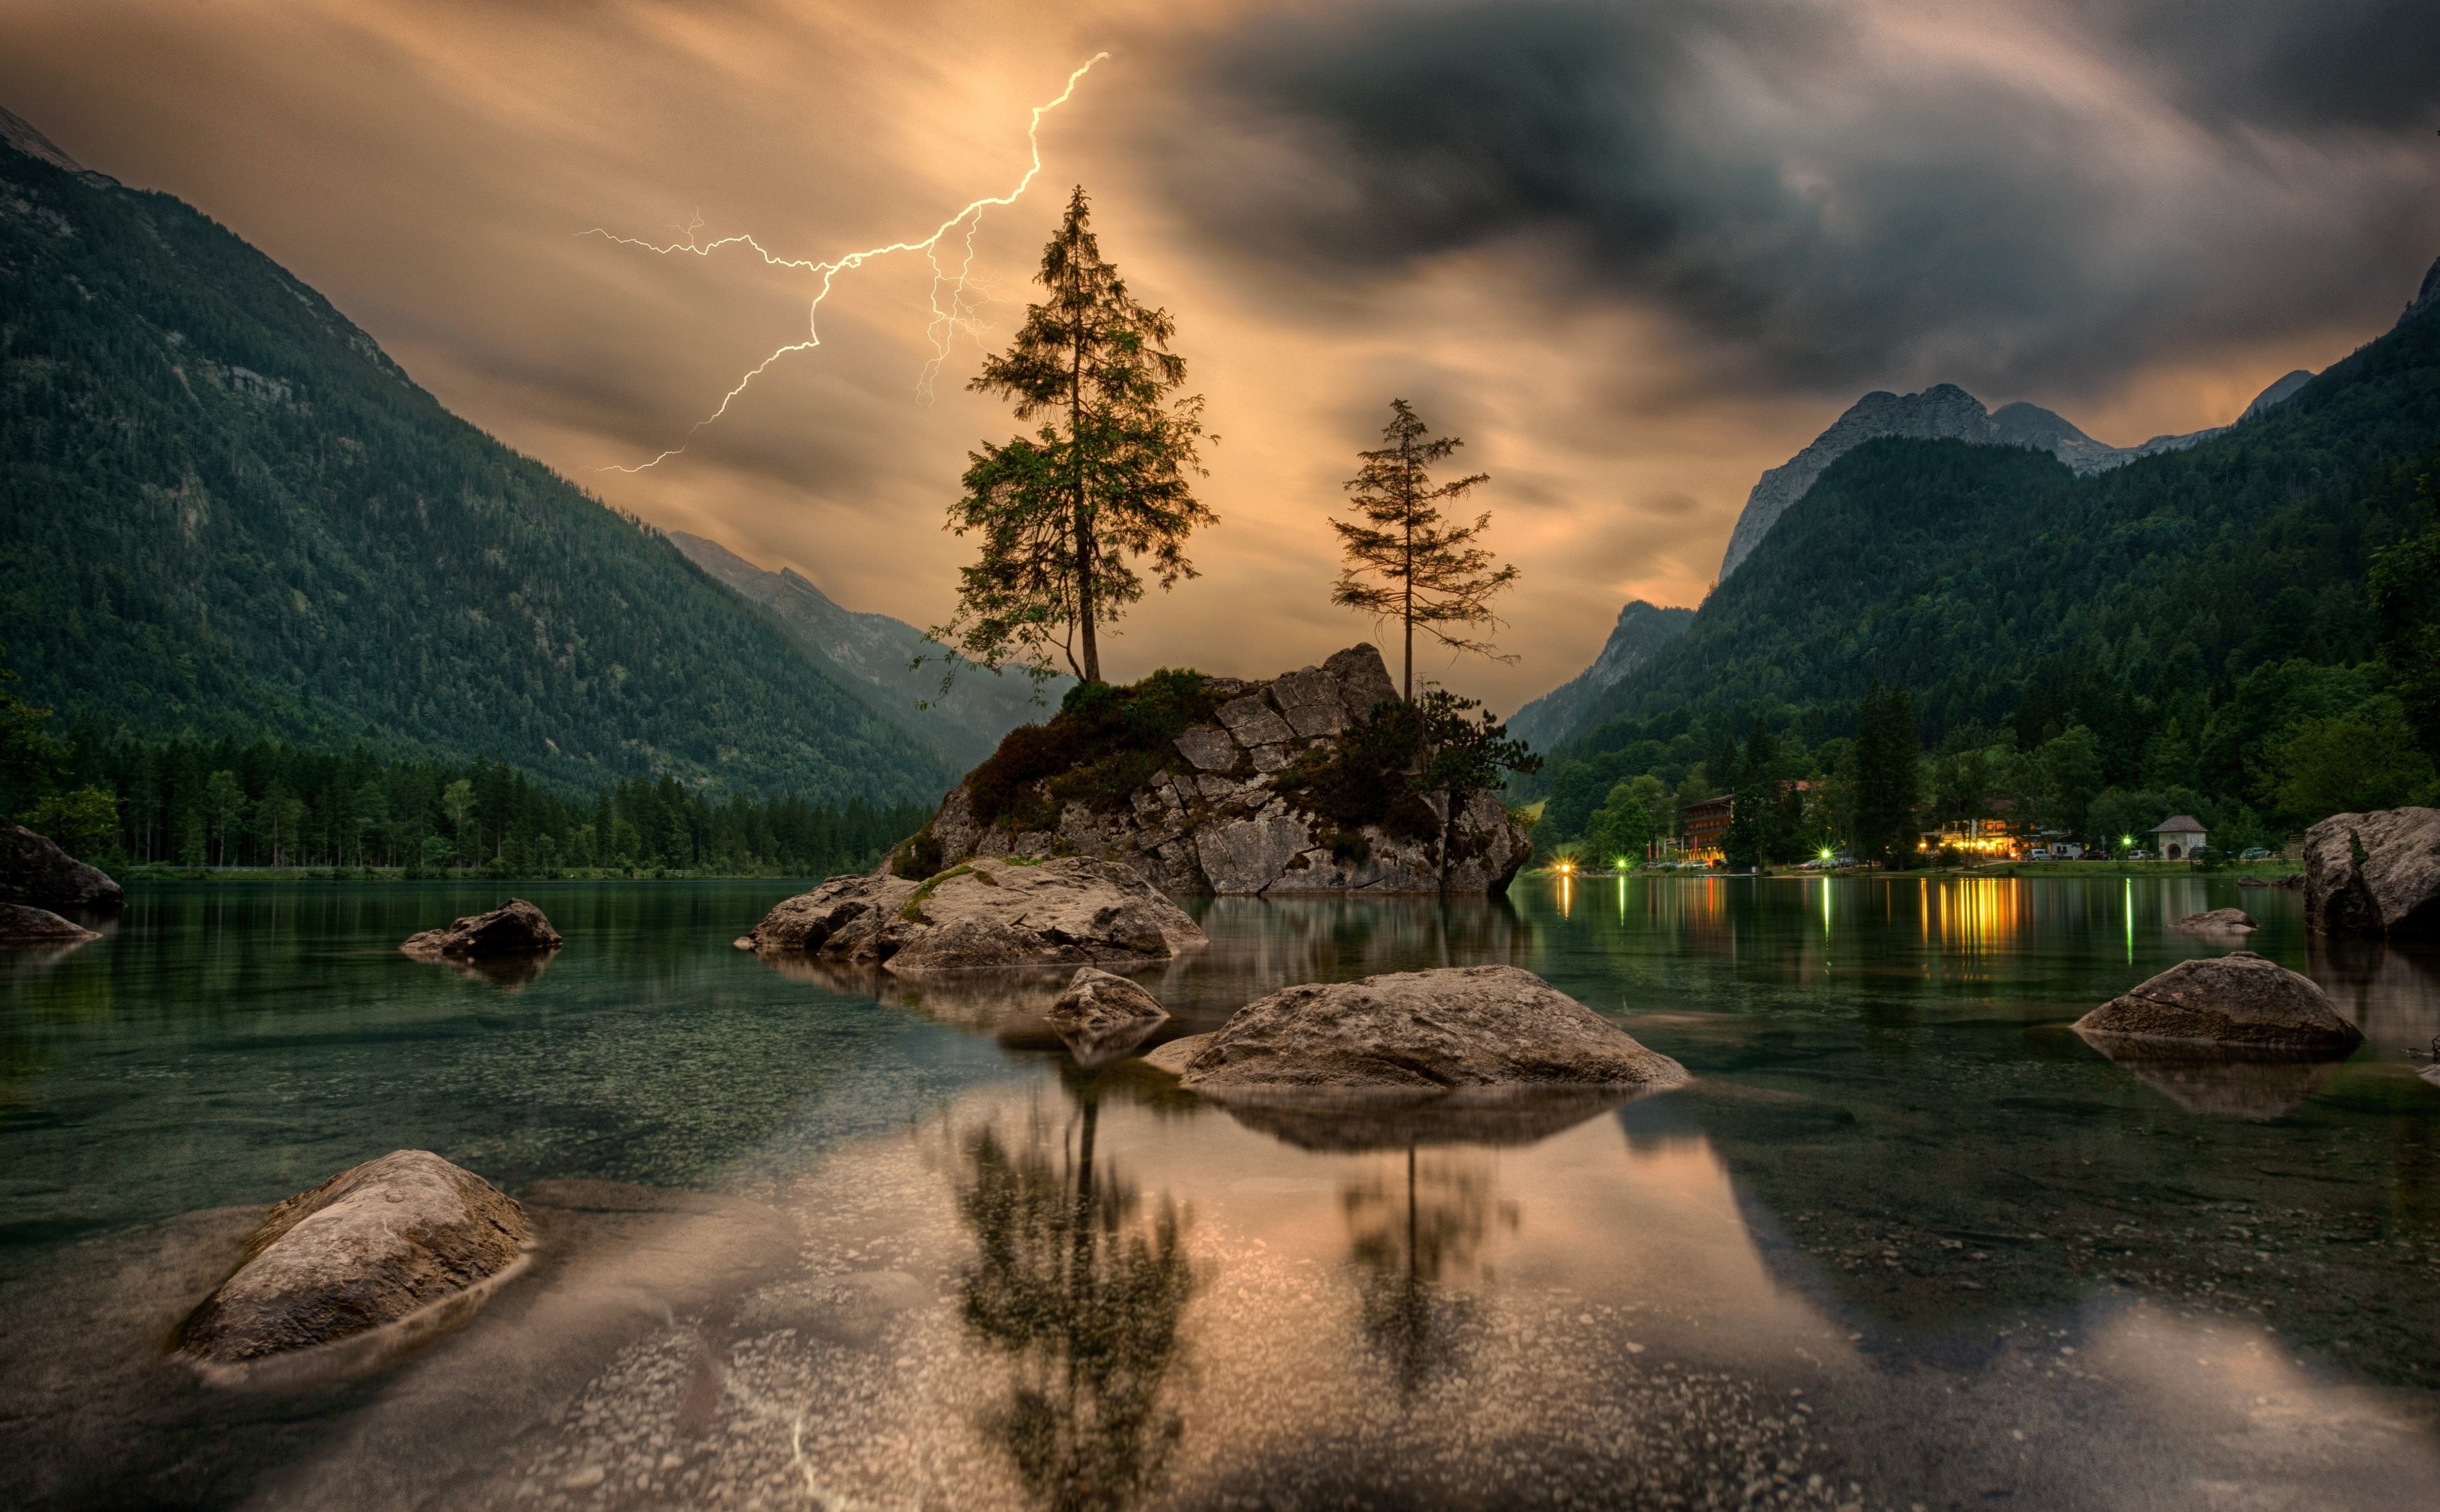 Thunderstorm with Lightning in Mountain, body of water, Nature